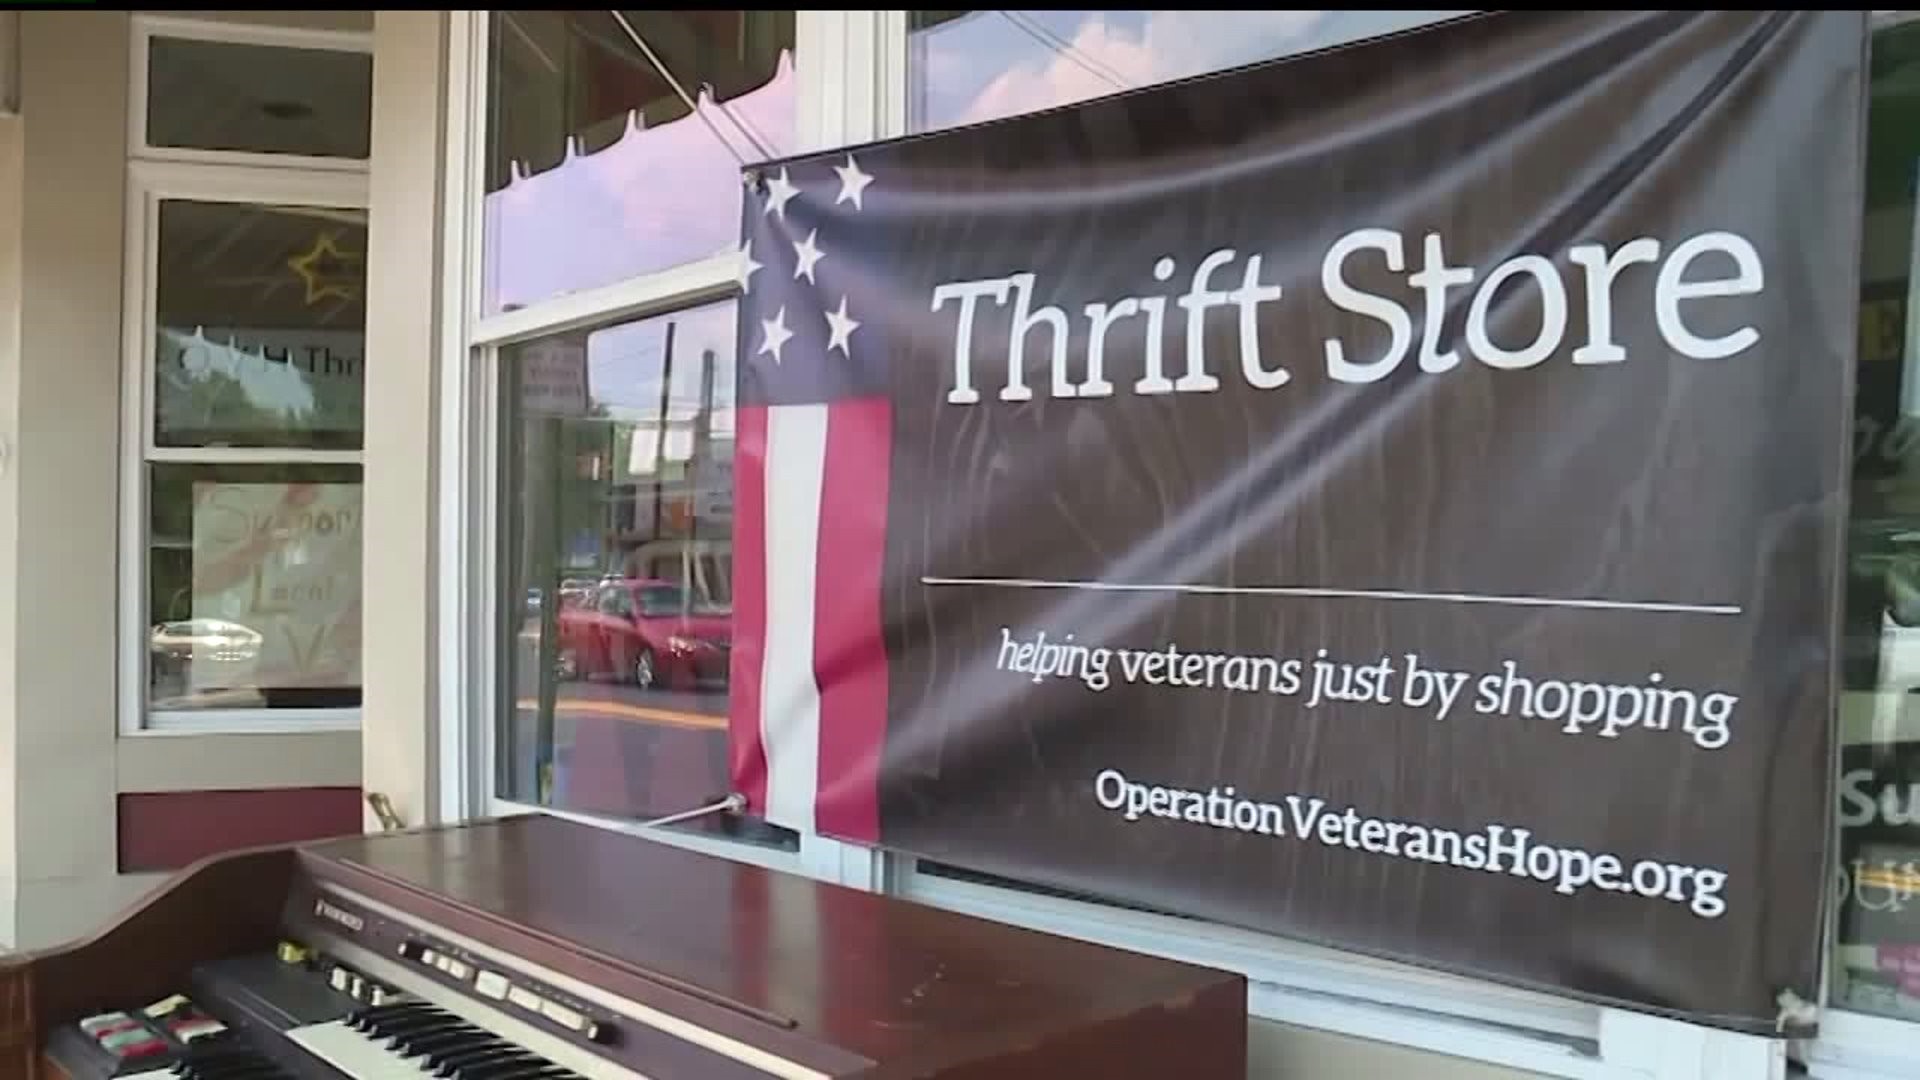 A Cumberland co. non-profit organization that helps homeless veterans robbed over weekend